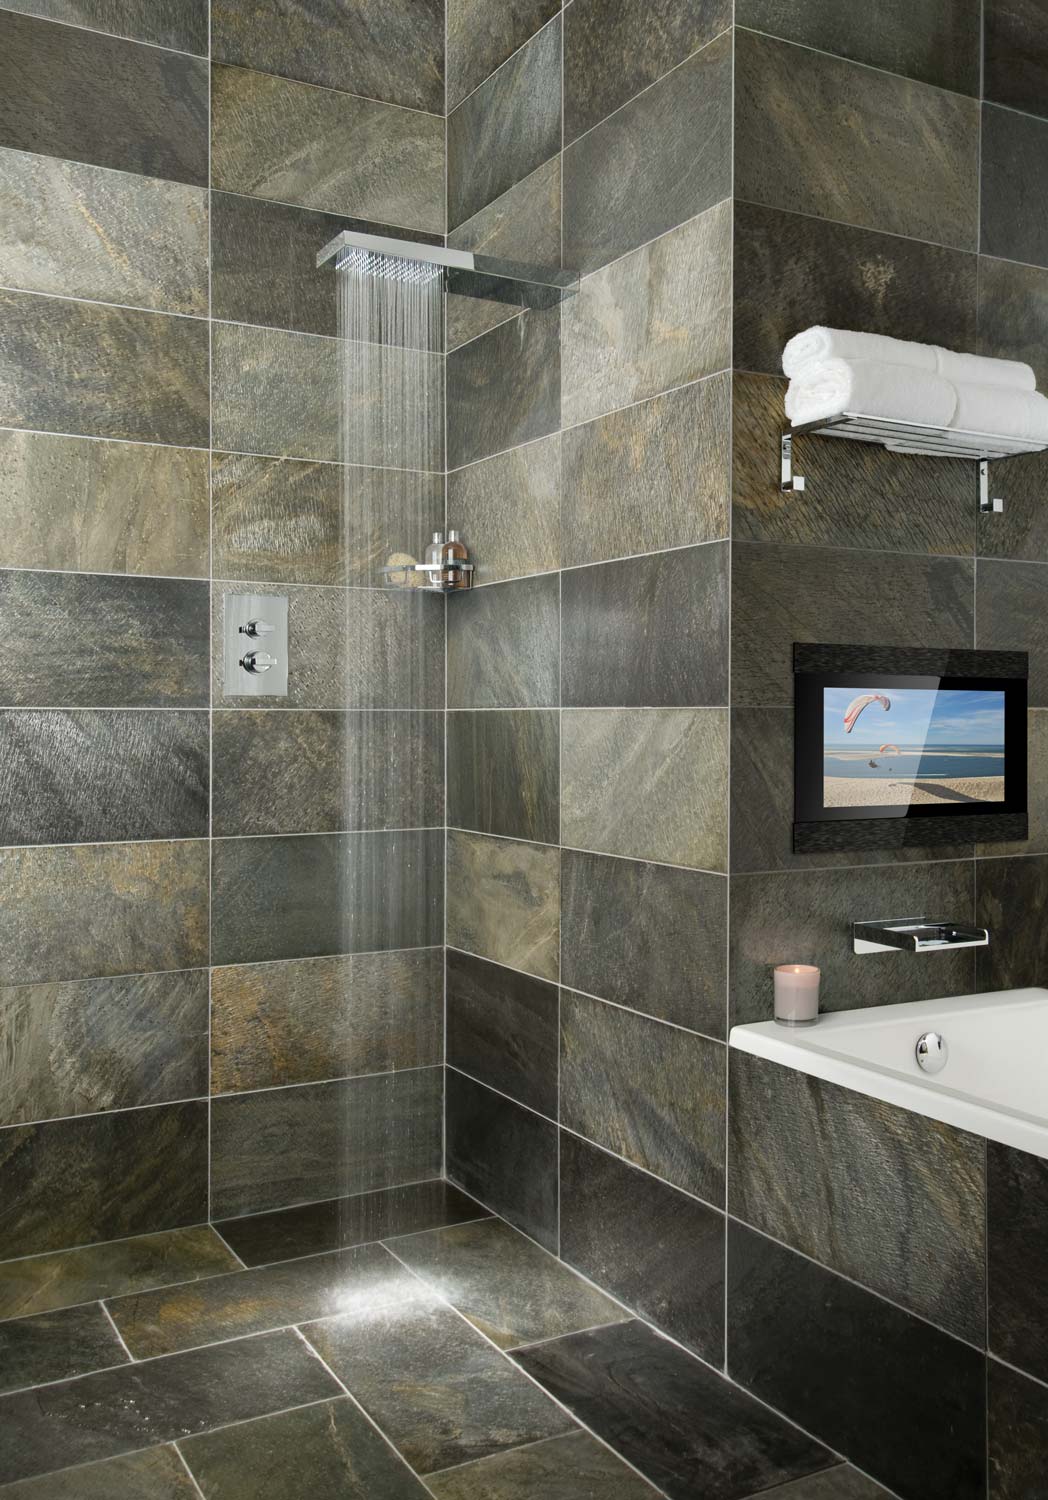 Tiled bathroom with a bath, shower, accessory basket, rectangular wall mounted thermostatic valve and water cascading from the shower head